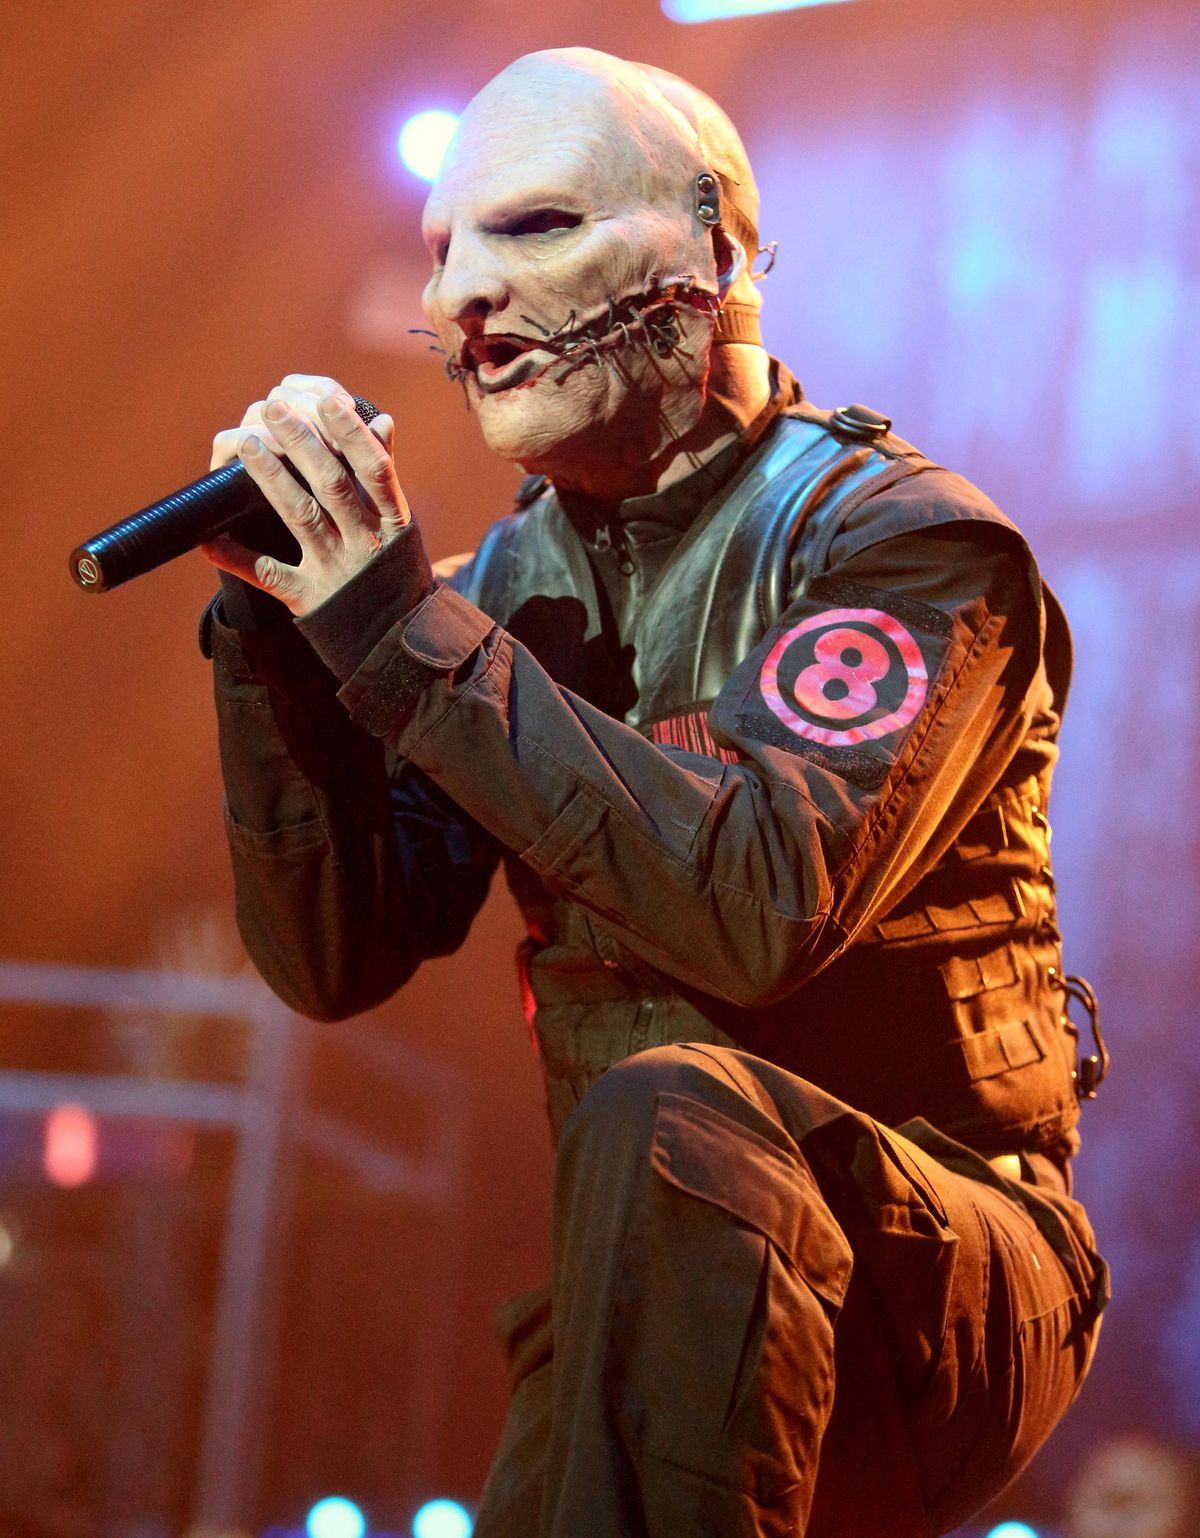 Corey Taylor of the band Slipknot, which performs Tuesday night at the Spokane Arena. (Associated Press)